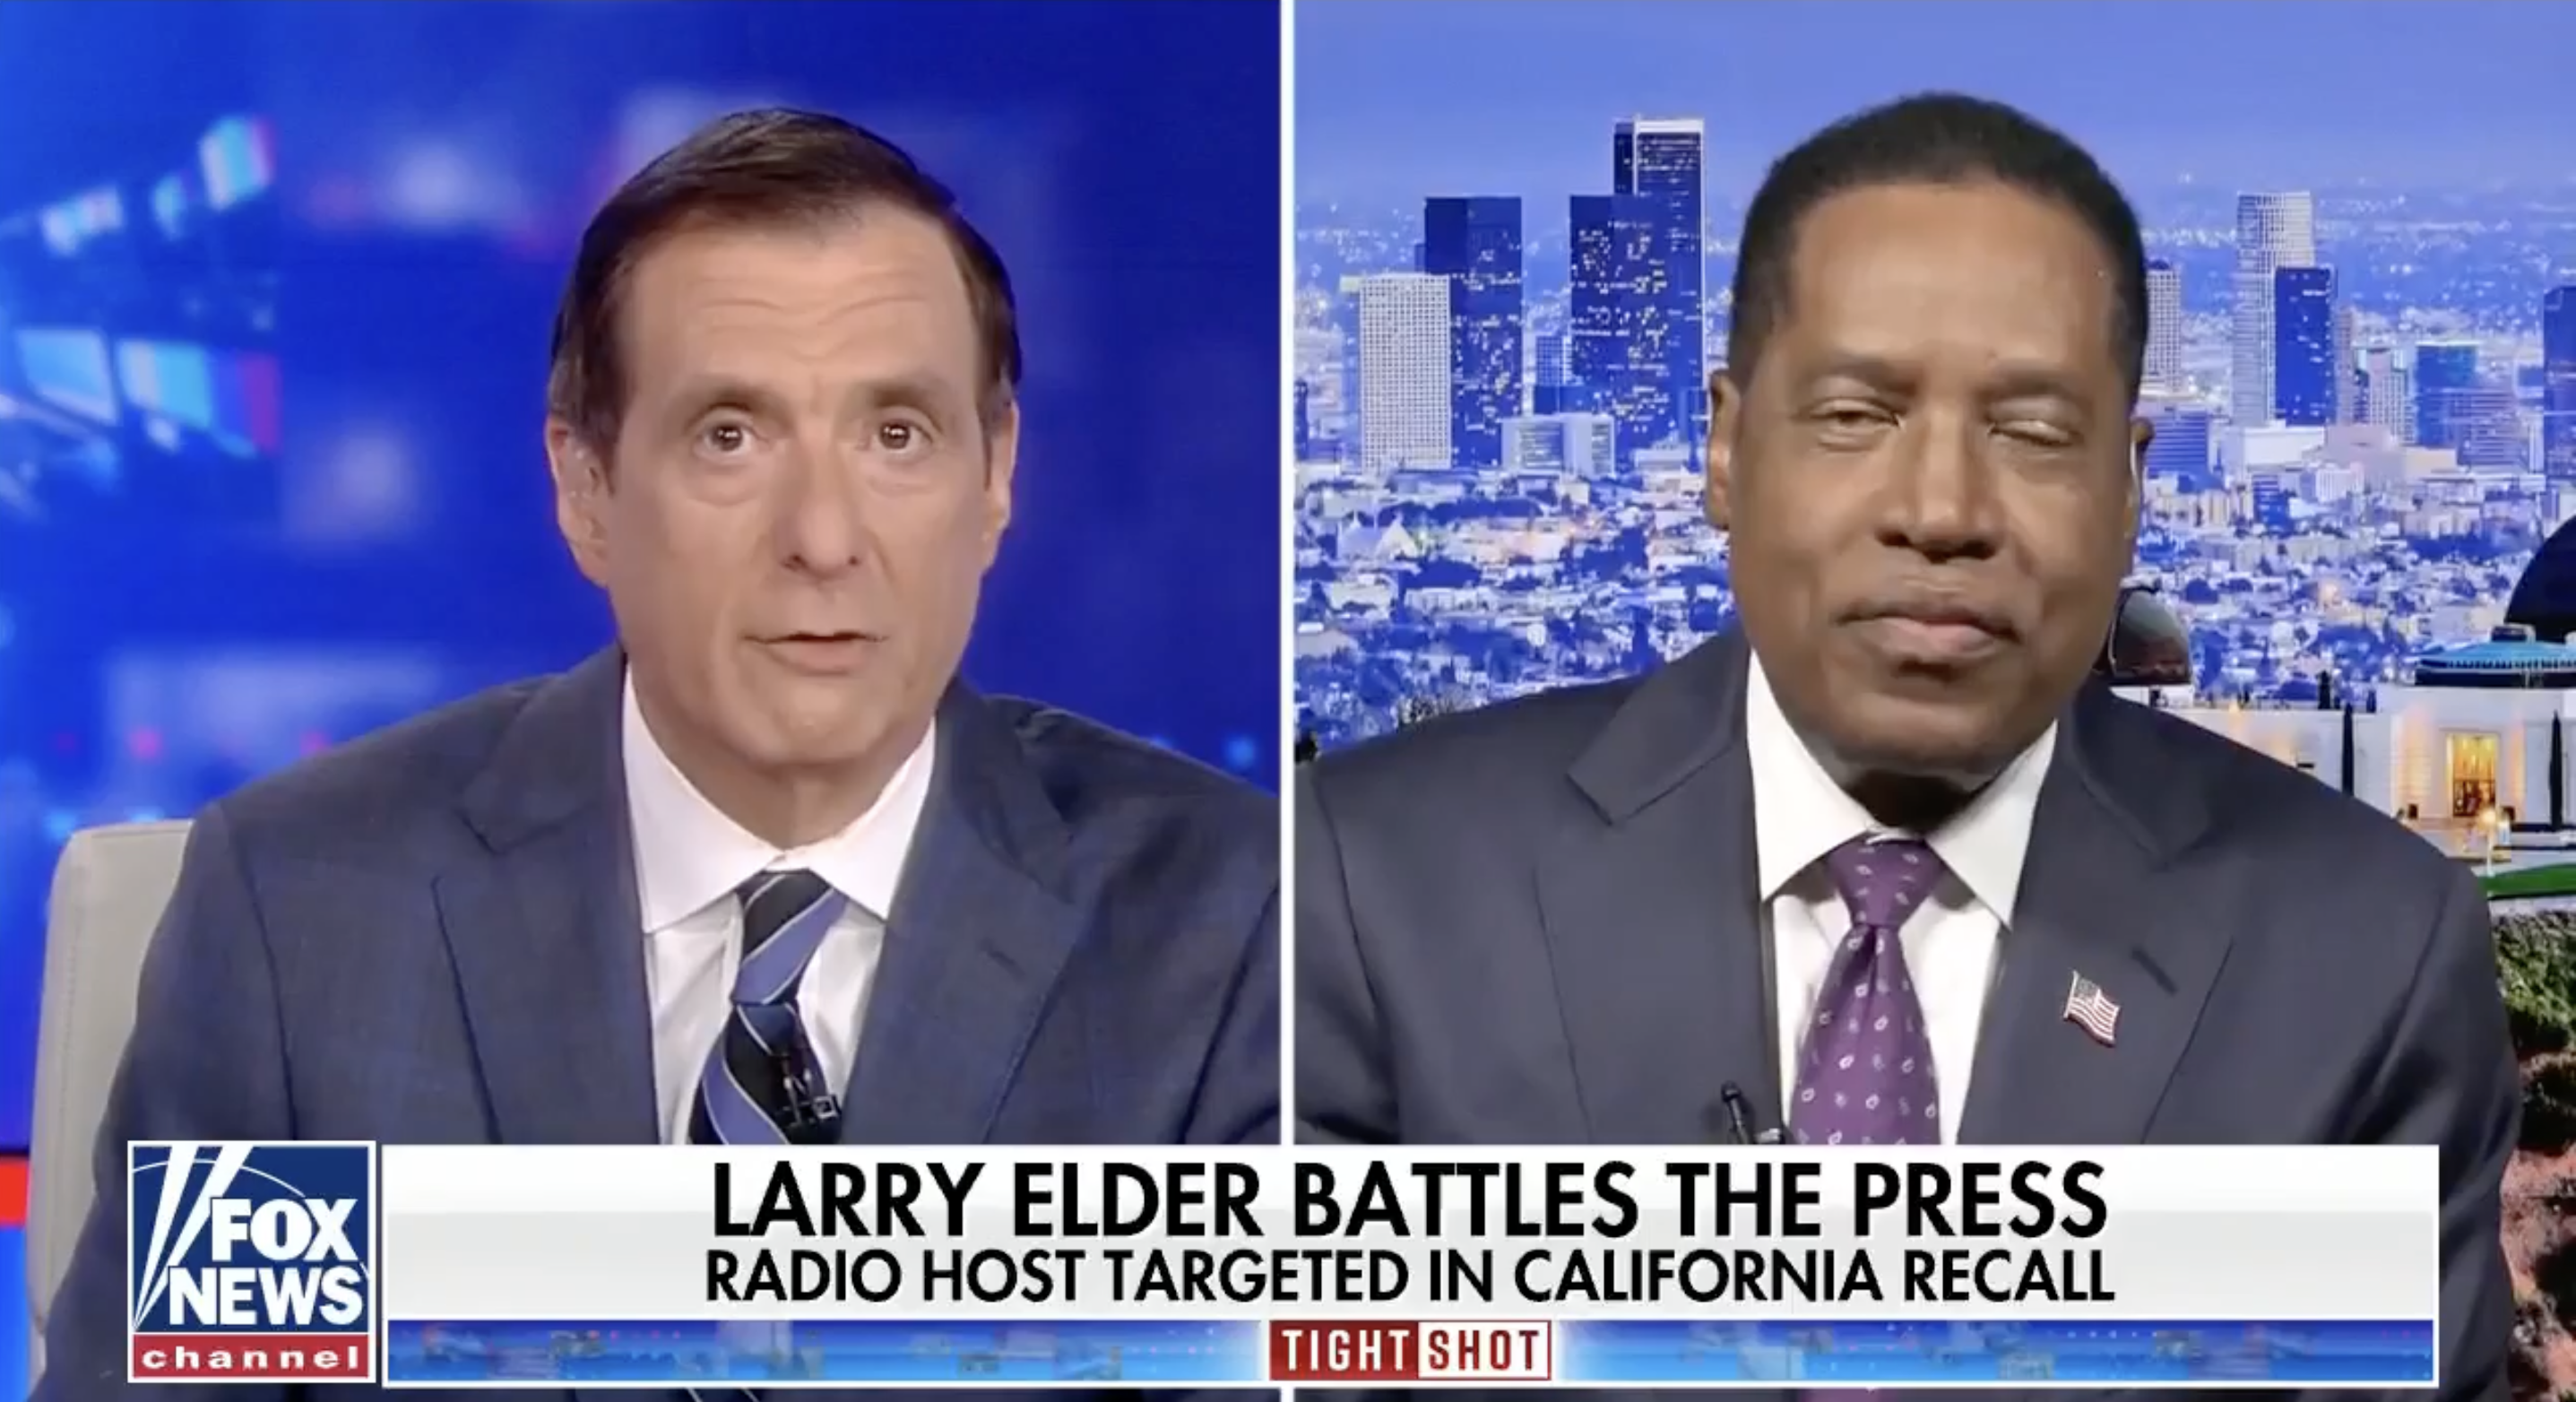 Fox Information Host Confronts Larry Elder Above His Media Criticism, Suggests He is ‘Fair Game’